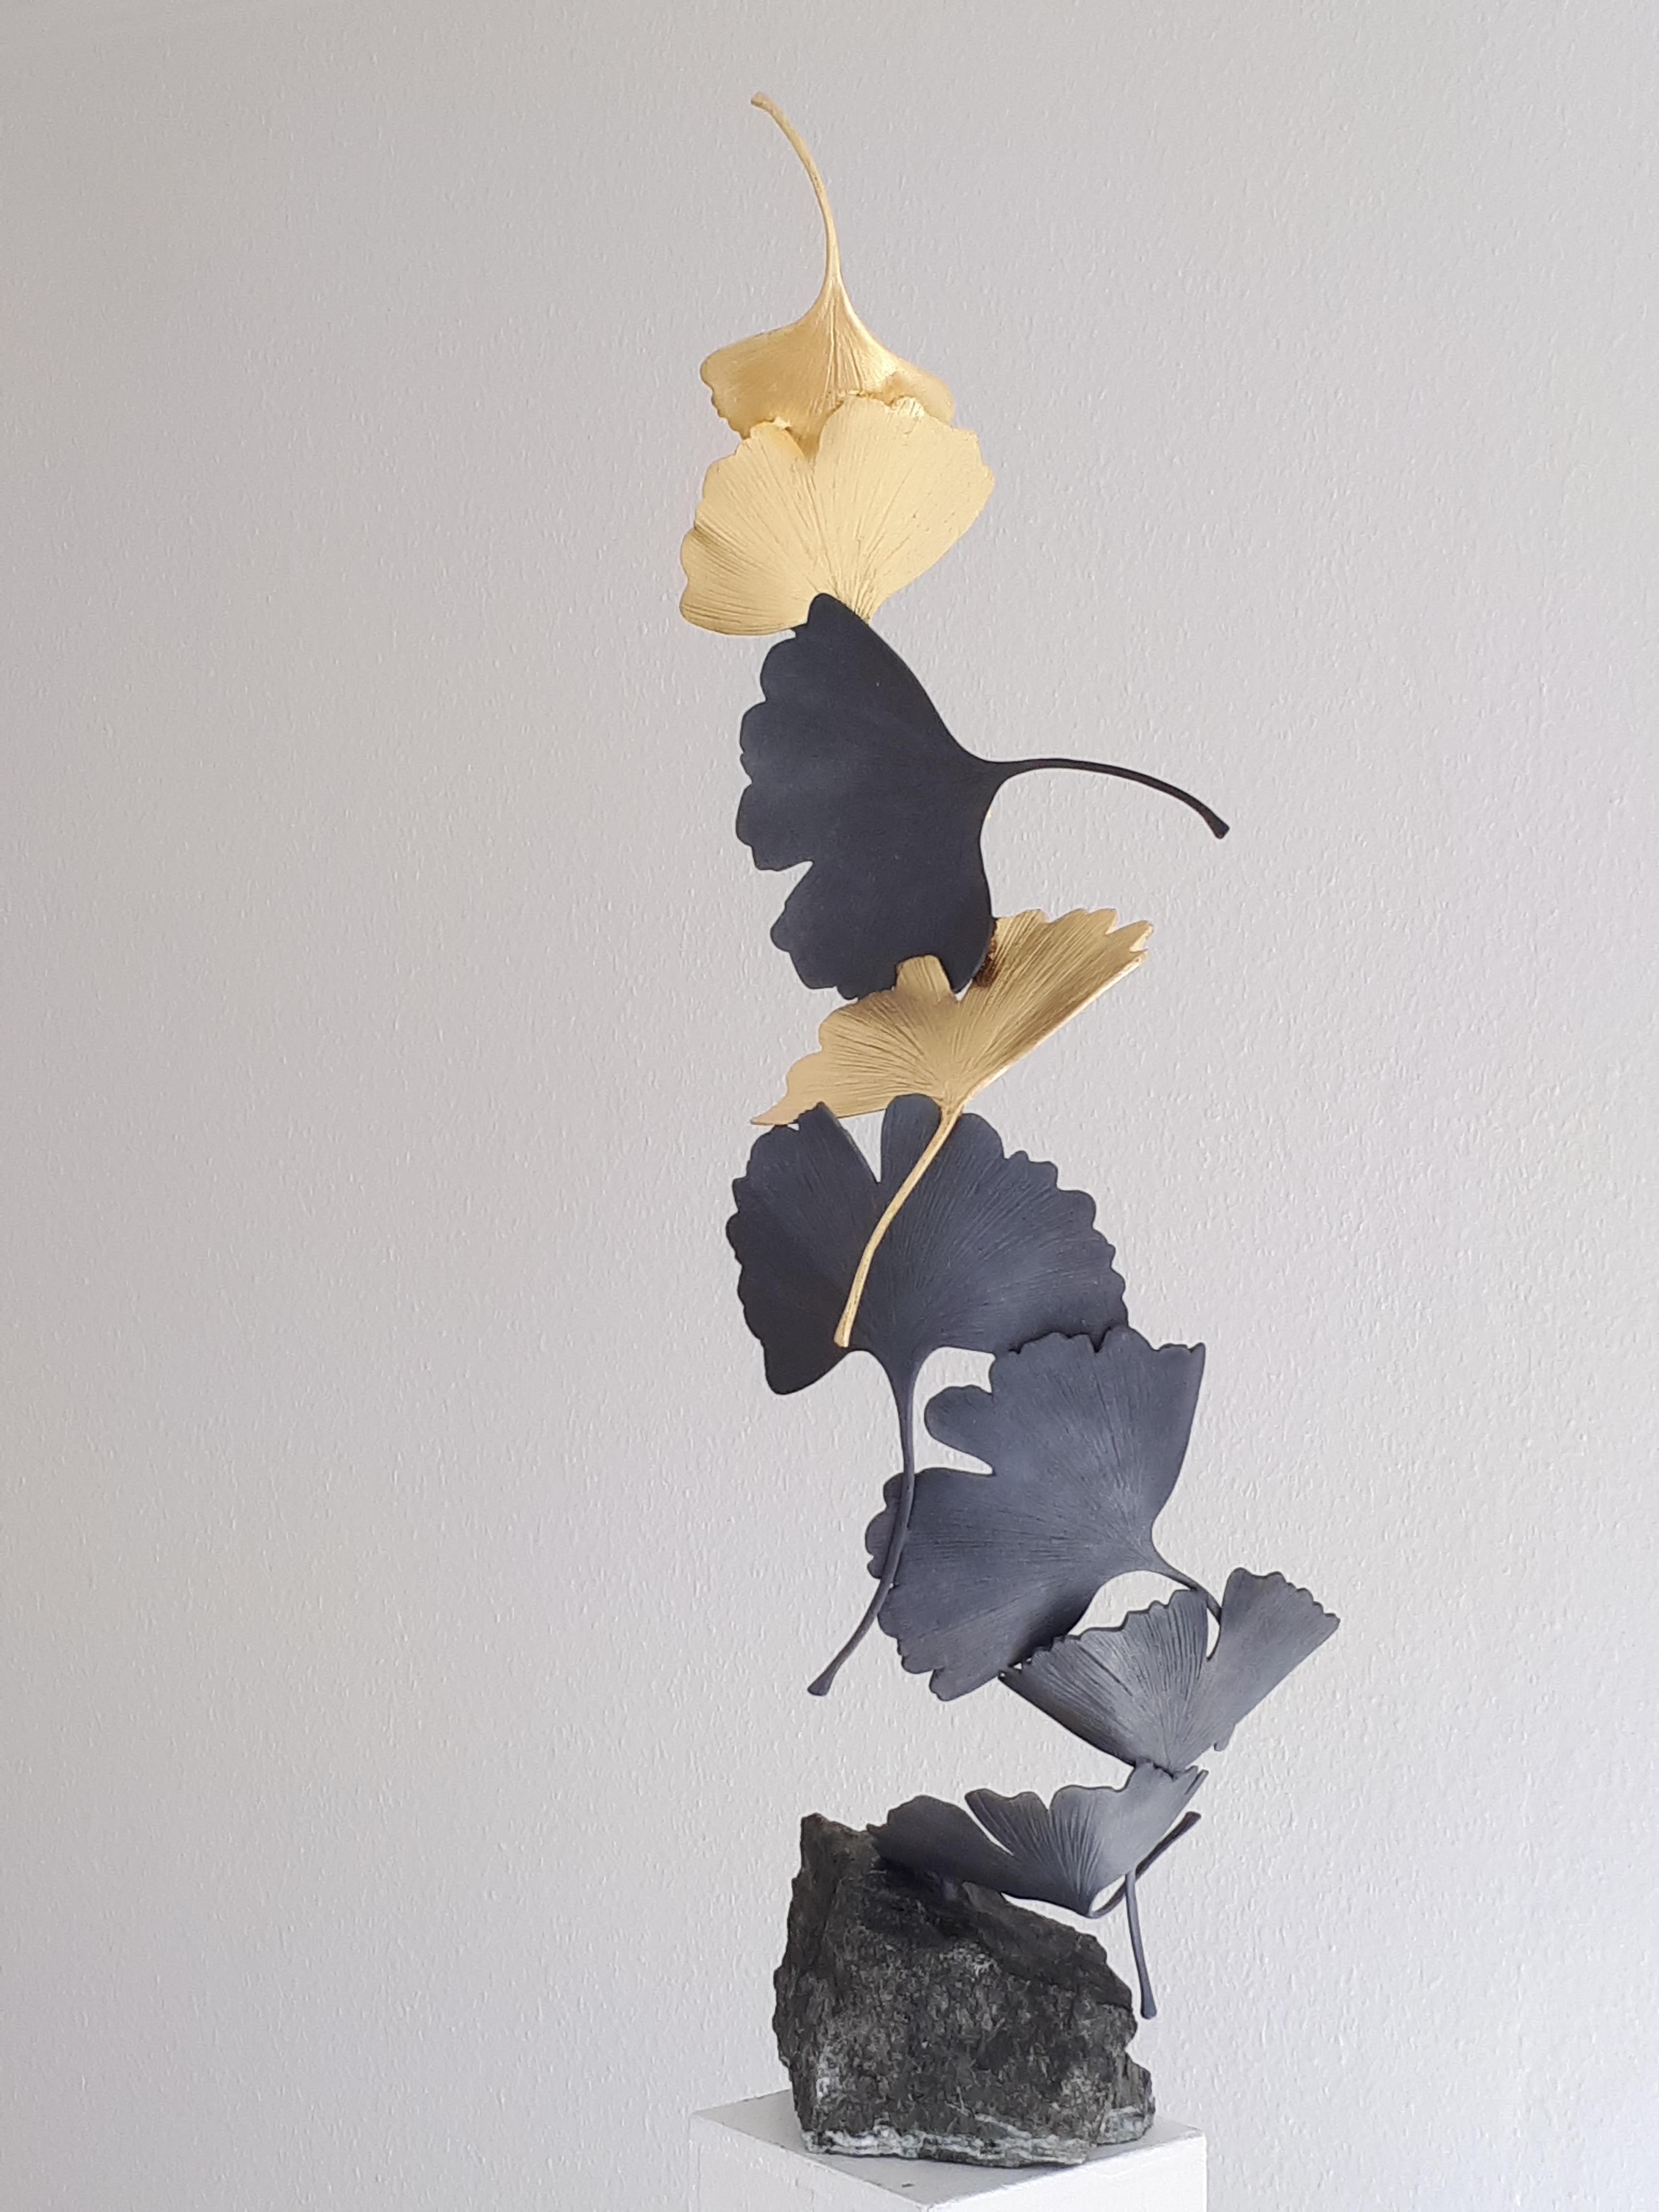 Artist: Kuno Vollet

Title: Grey Bronze Gingko with 8 leaves sculpture four or three of them in gold leaf - arrangement of gold leaves can be chosen by client.

Base can be chosen between rough stone, black or white marble.

About the Gallery:
Folly